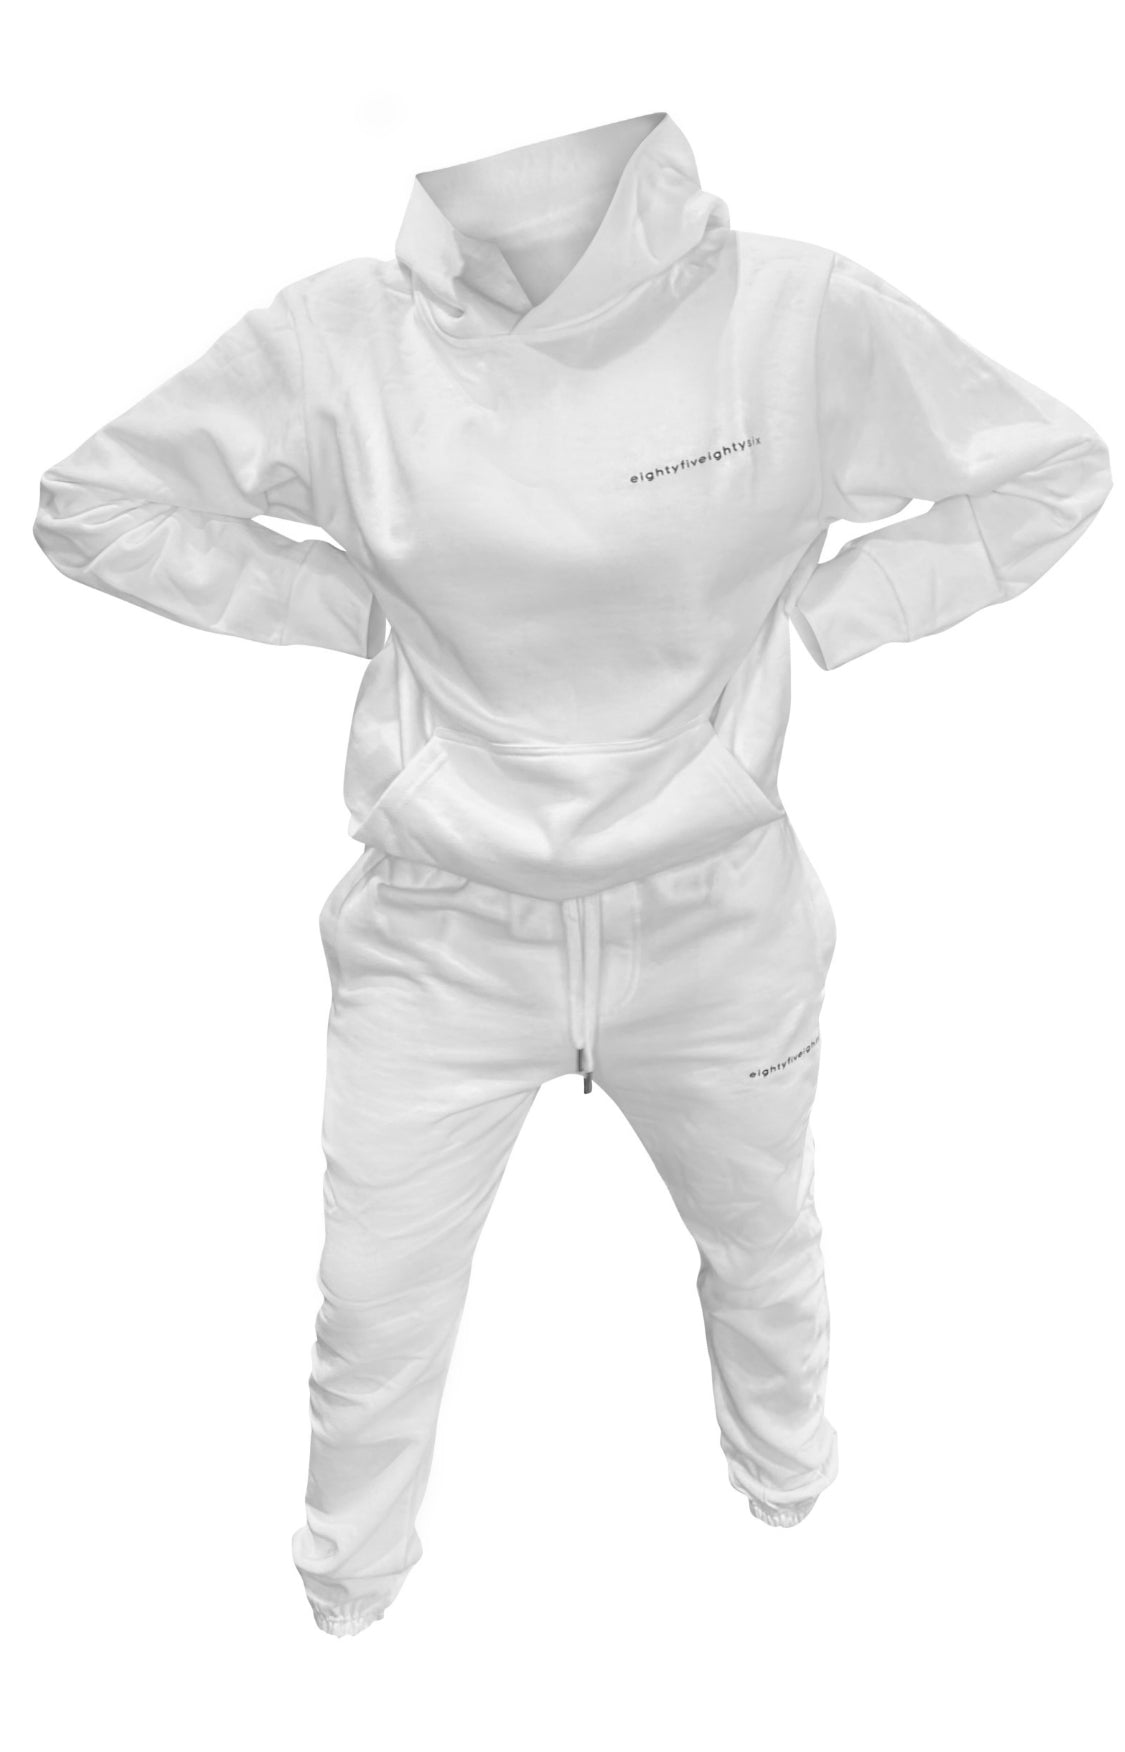 8586: DRAWSTRING LOGO SWEATPANTS IN WHITE (sweatpants and matching hoodie front view)